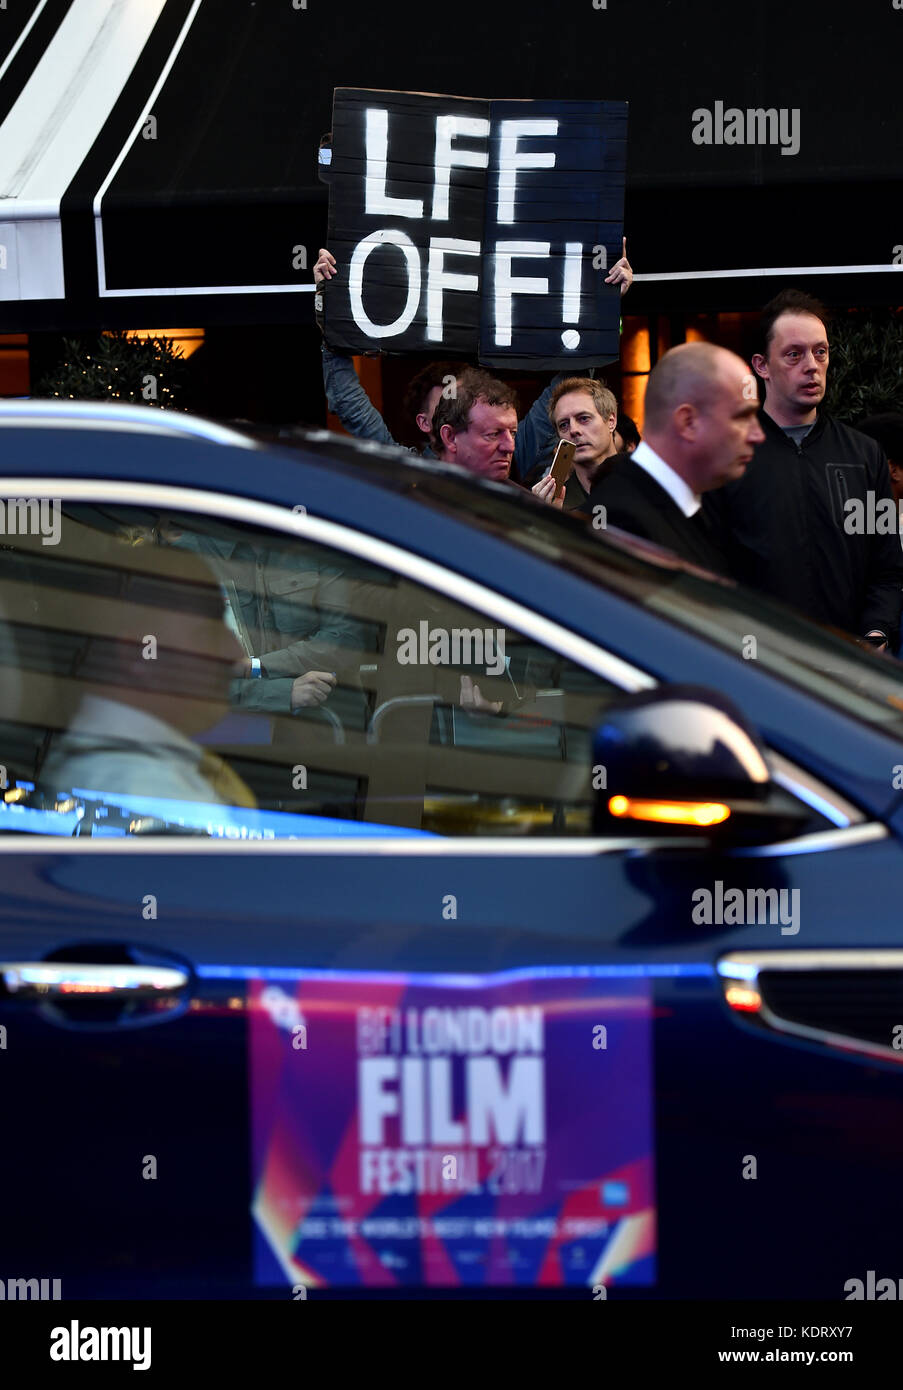 A protester with a sign reading 'LFF OFF!' in the crowd at the premiere of Three Billboards Outside Ebbing, Missouri at the closing gala of the BFI London Film Festival, at the Odeon Leicester Square, London. Stock Photo